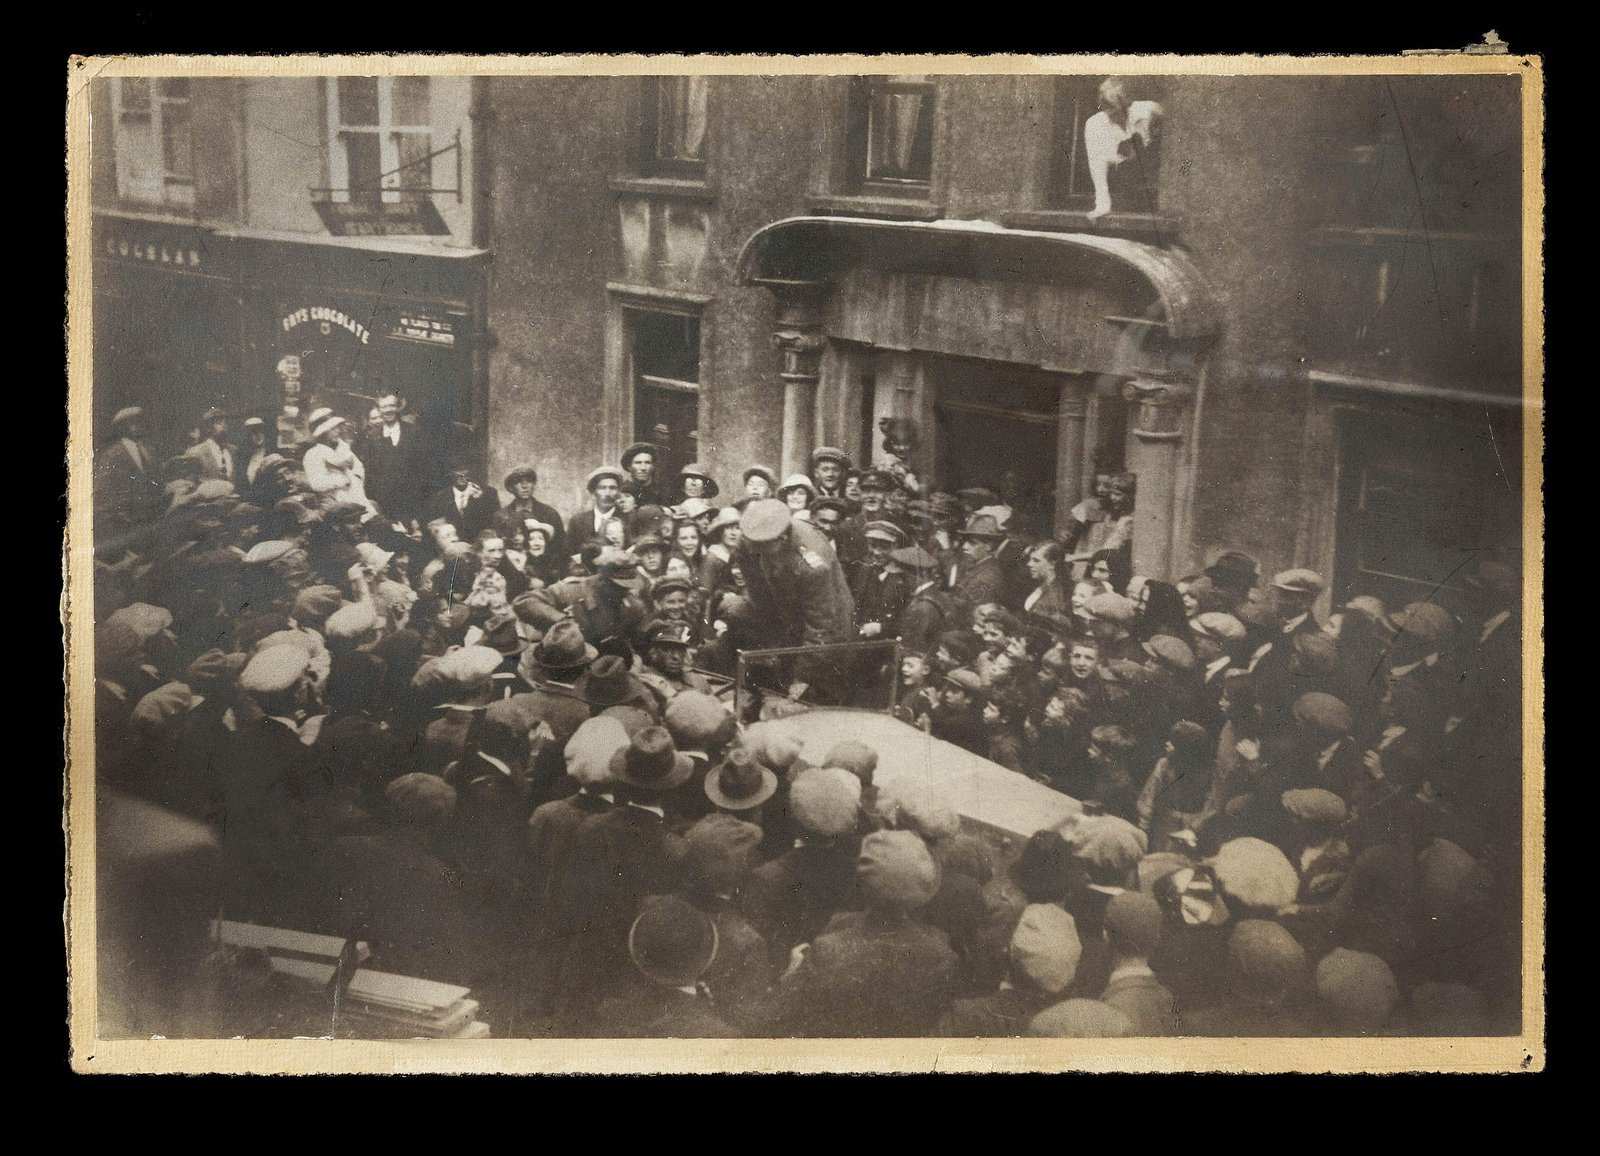 Image - Michael Collins gets into the Touring car outside Eldon's Hotel in Skibbereen, to begin the return journey that would end at Béal na Bláth. To the very end, crowds cheered him (Pic: Cork Public Museum)